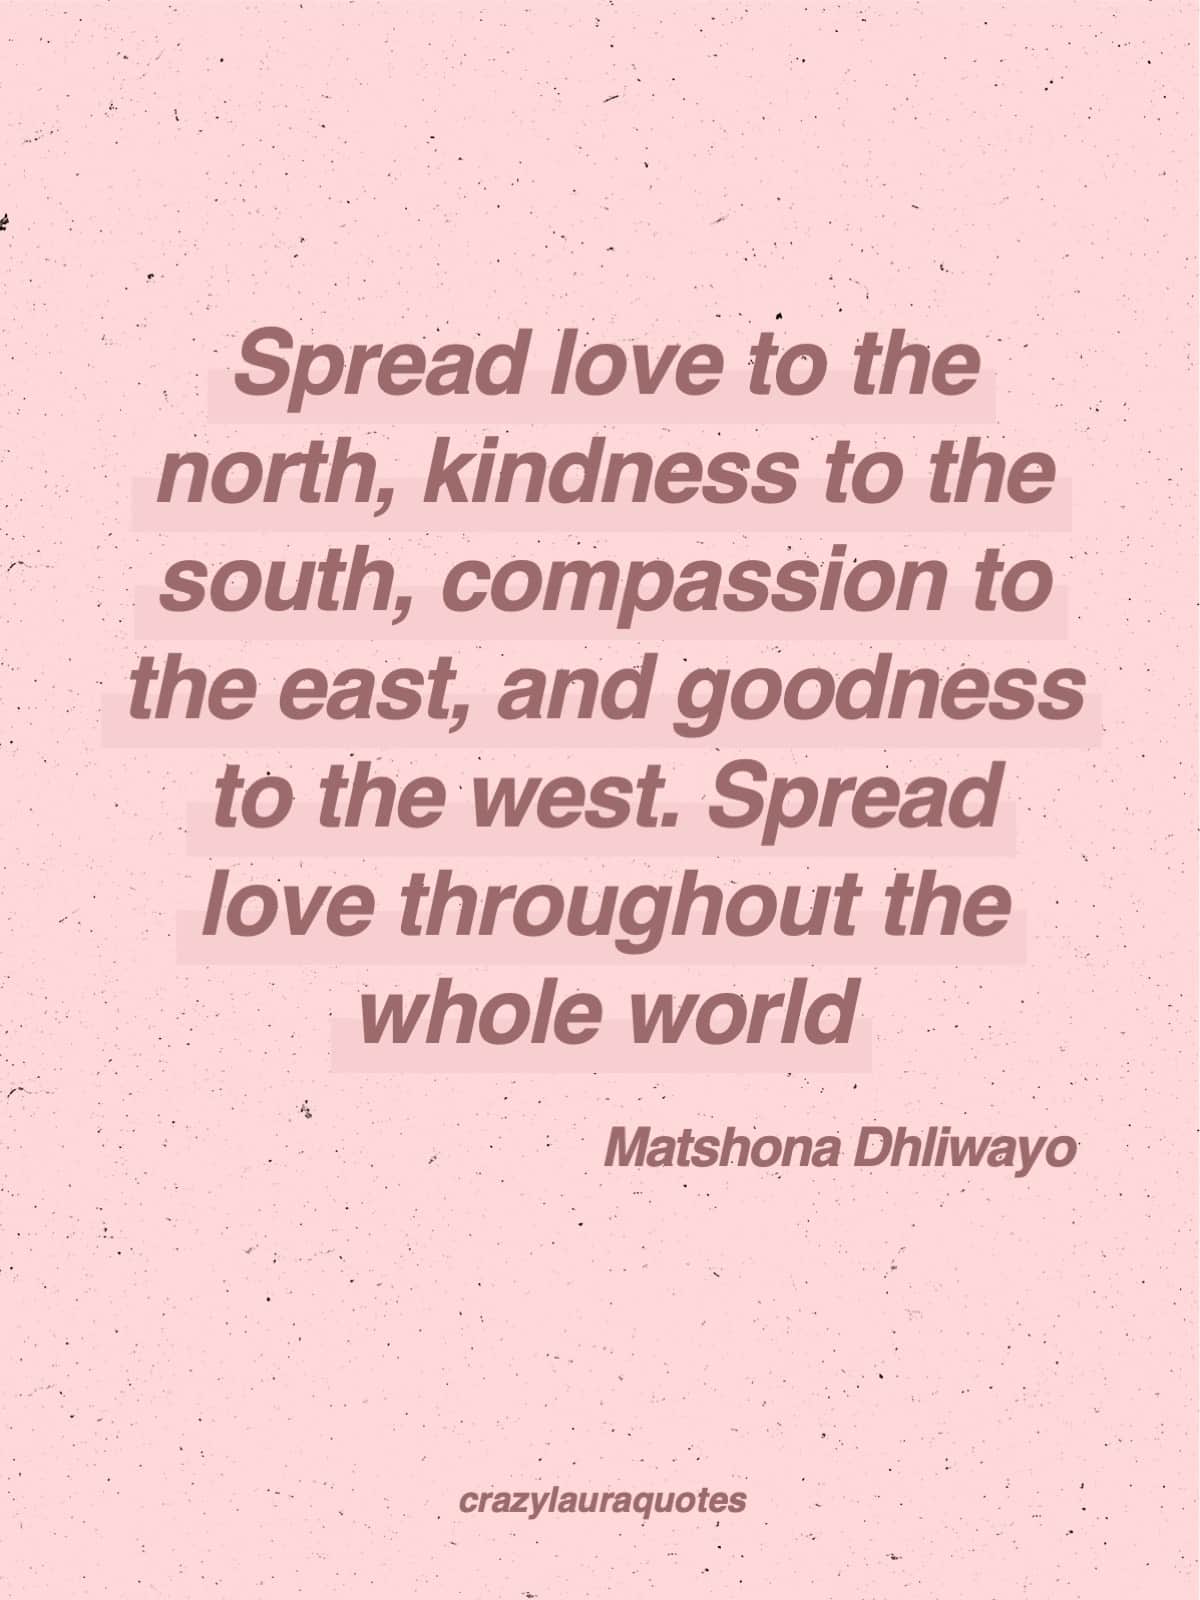 Be Kind and Spread Love Everywhere You Go - Spread Love - Pin